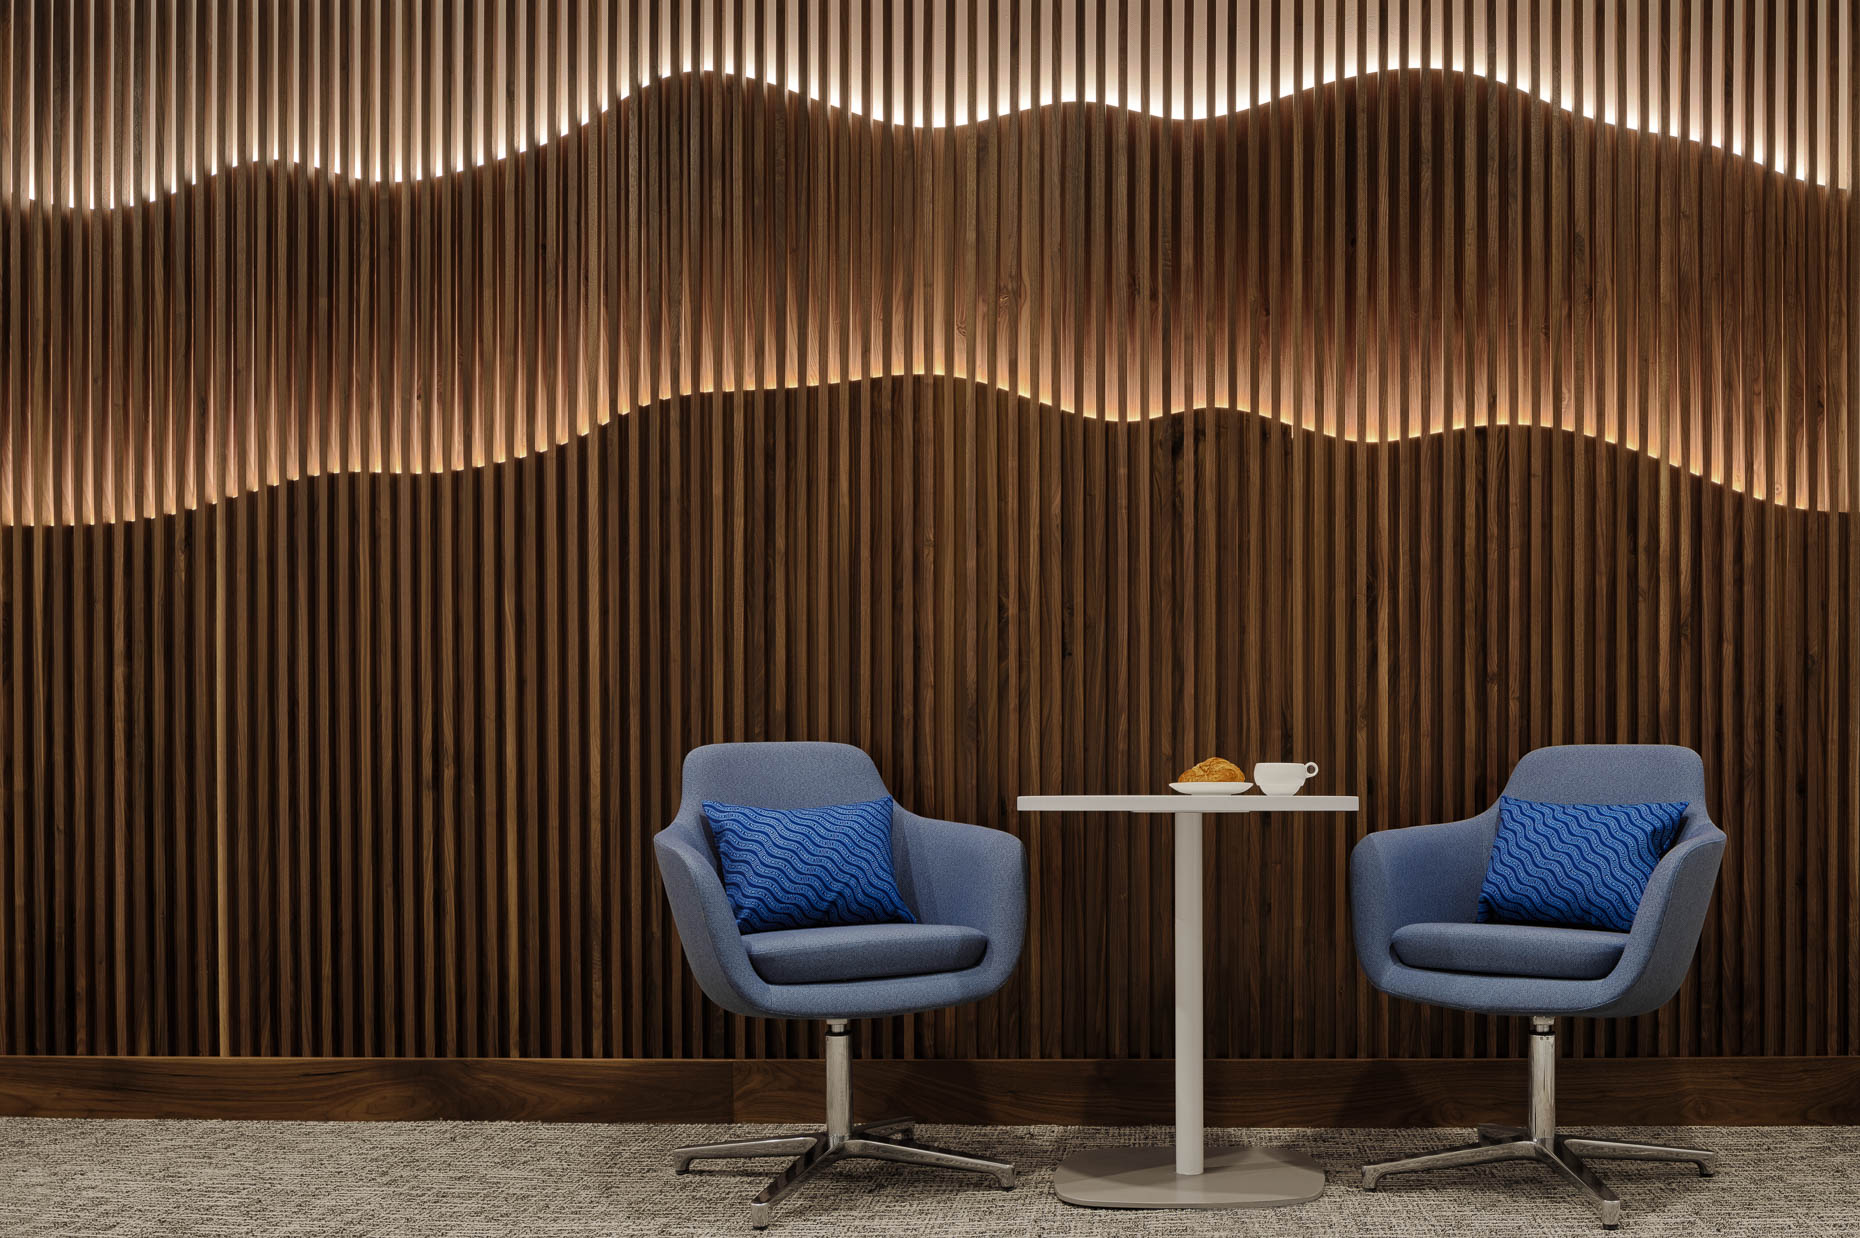 Los Angeles International Airport AMEX Centurion Lounge for American Express photographed by Brad Feinknopf based in Columbus, Ohio